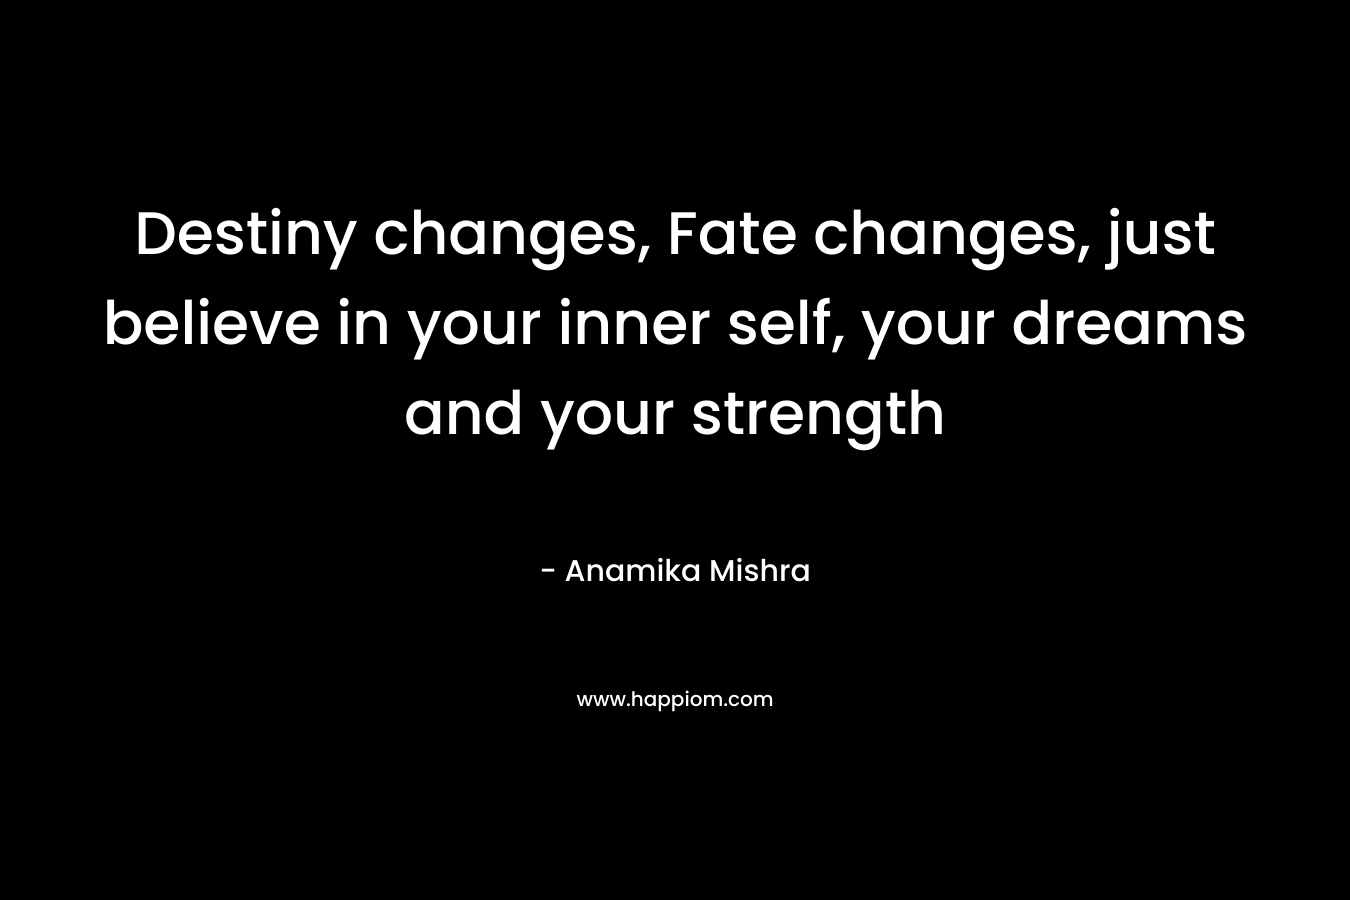 Destiny changes, Fate changes, just believe in your inner self, your dreams and your strength